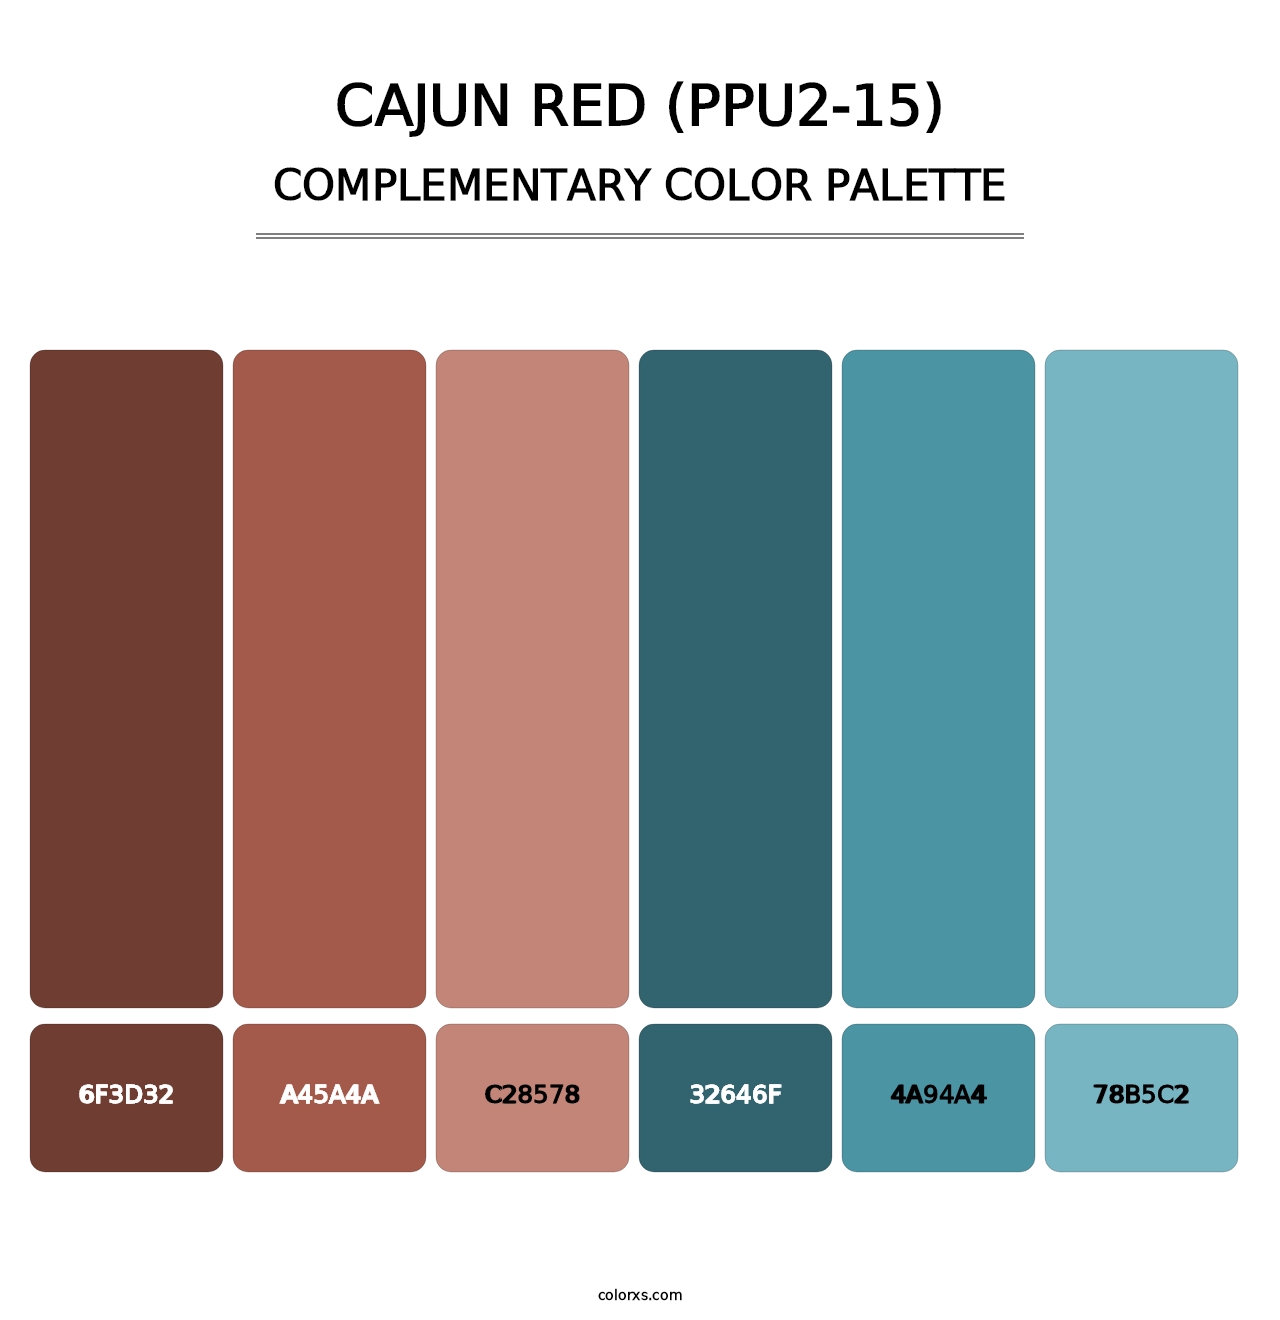 Cajun Red (PPU2-15) - Complementary Color Palette